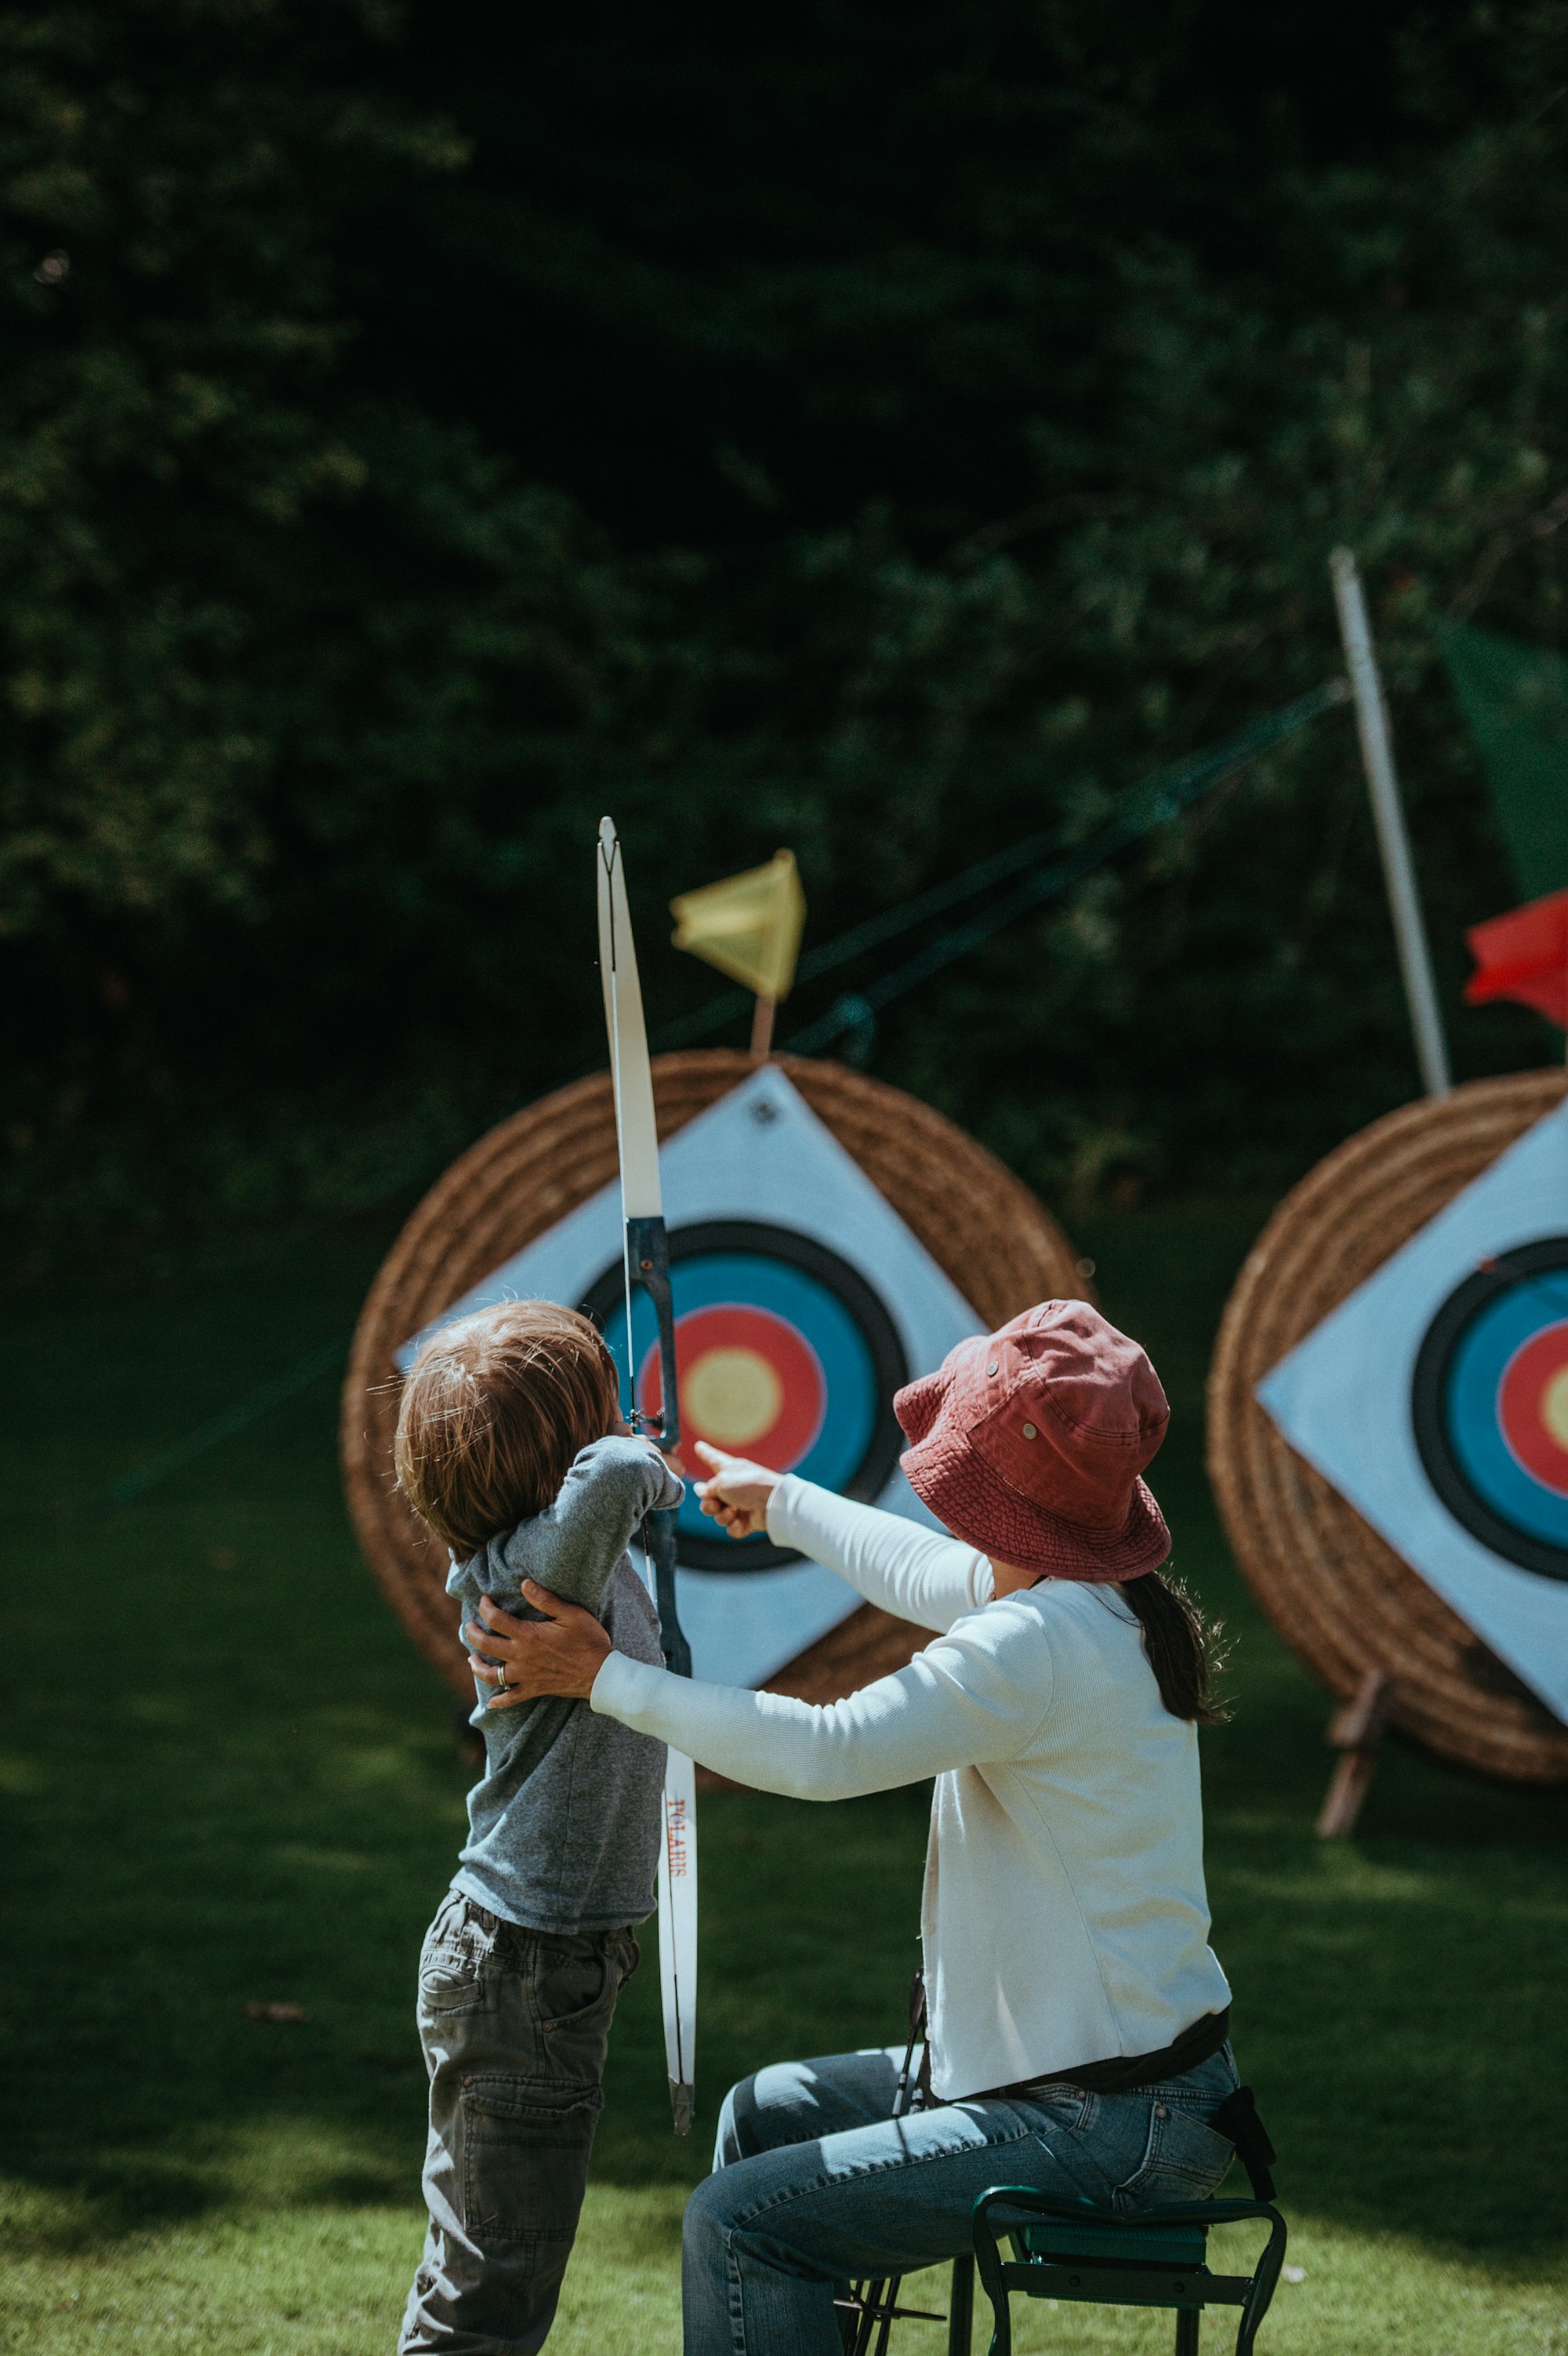 Child learning archery